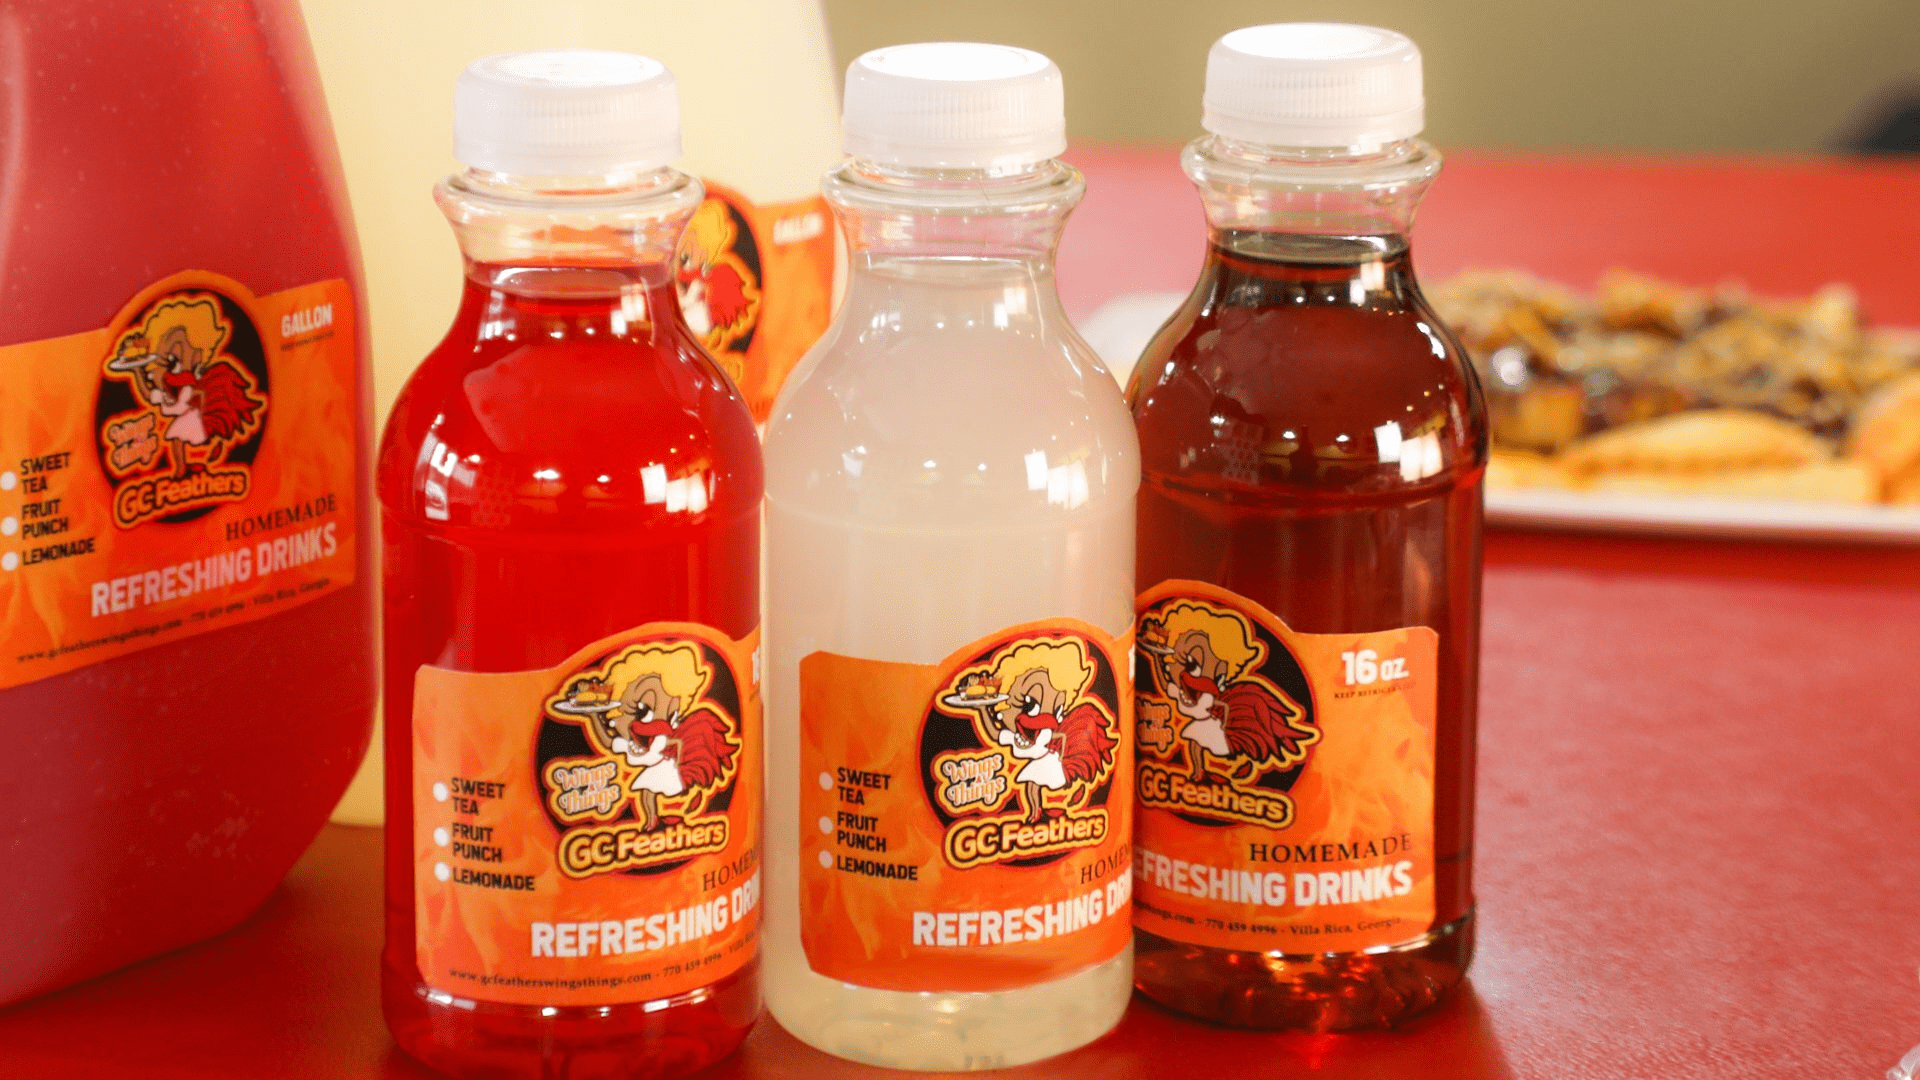 Three bottles of homemade refreshing drinks with distinct colors, labeled and presented on a table.